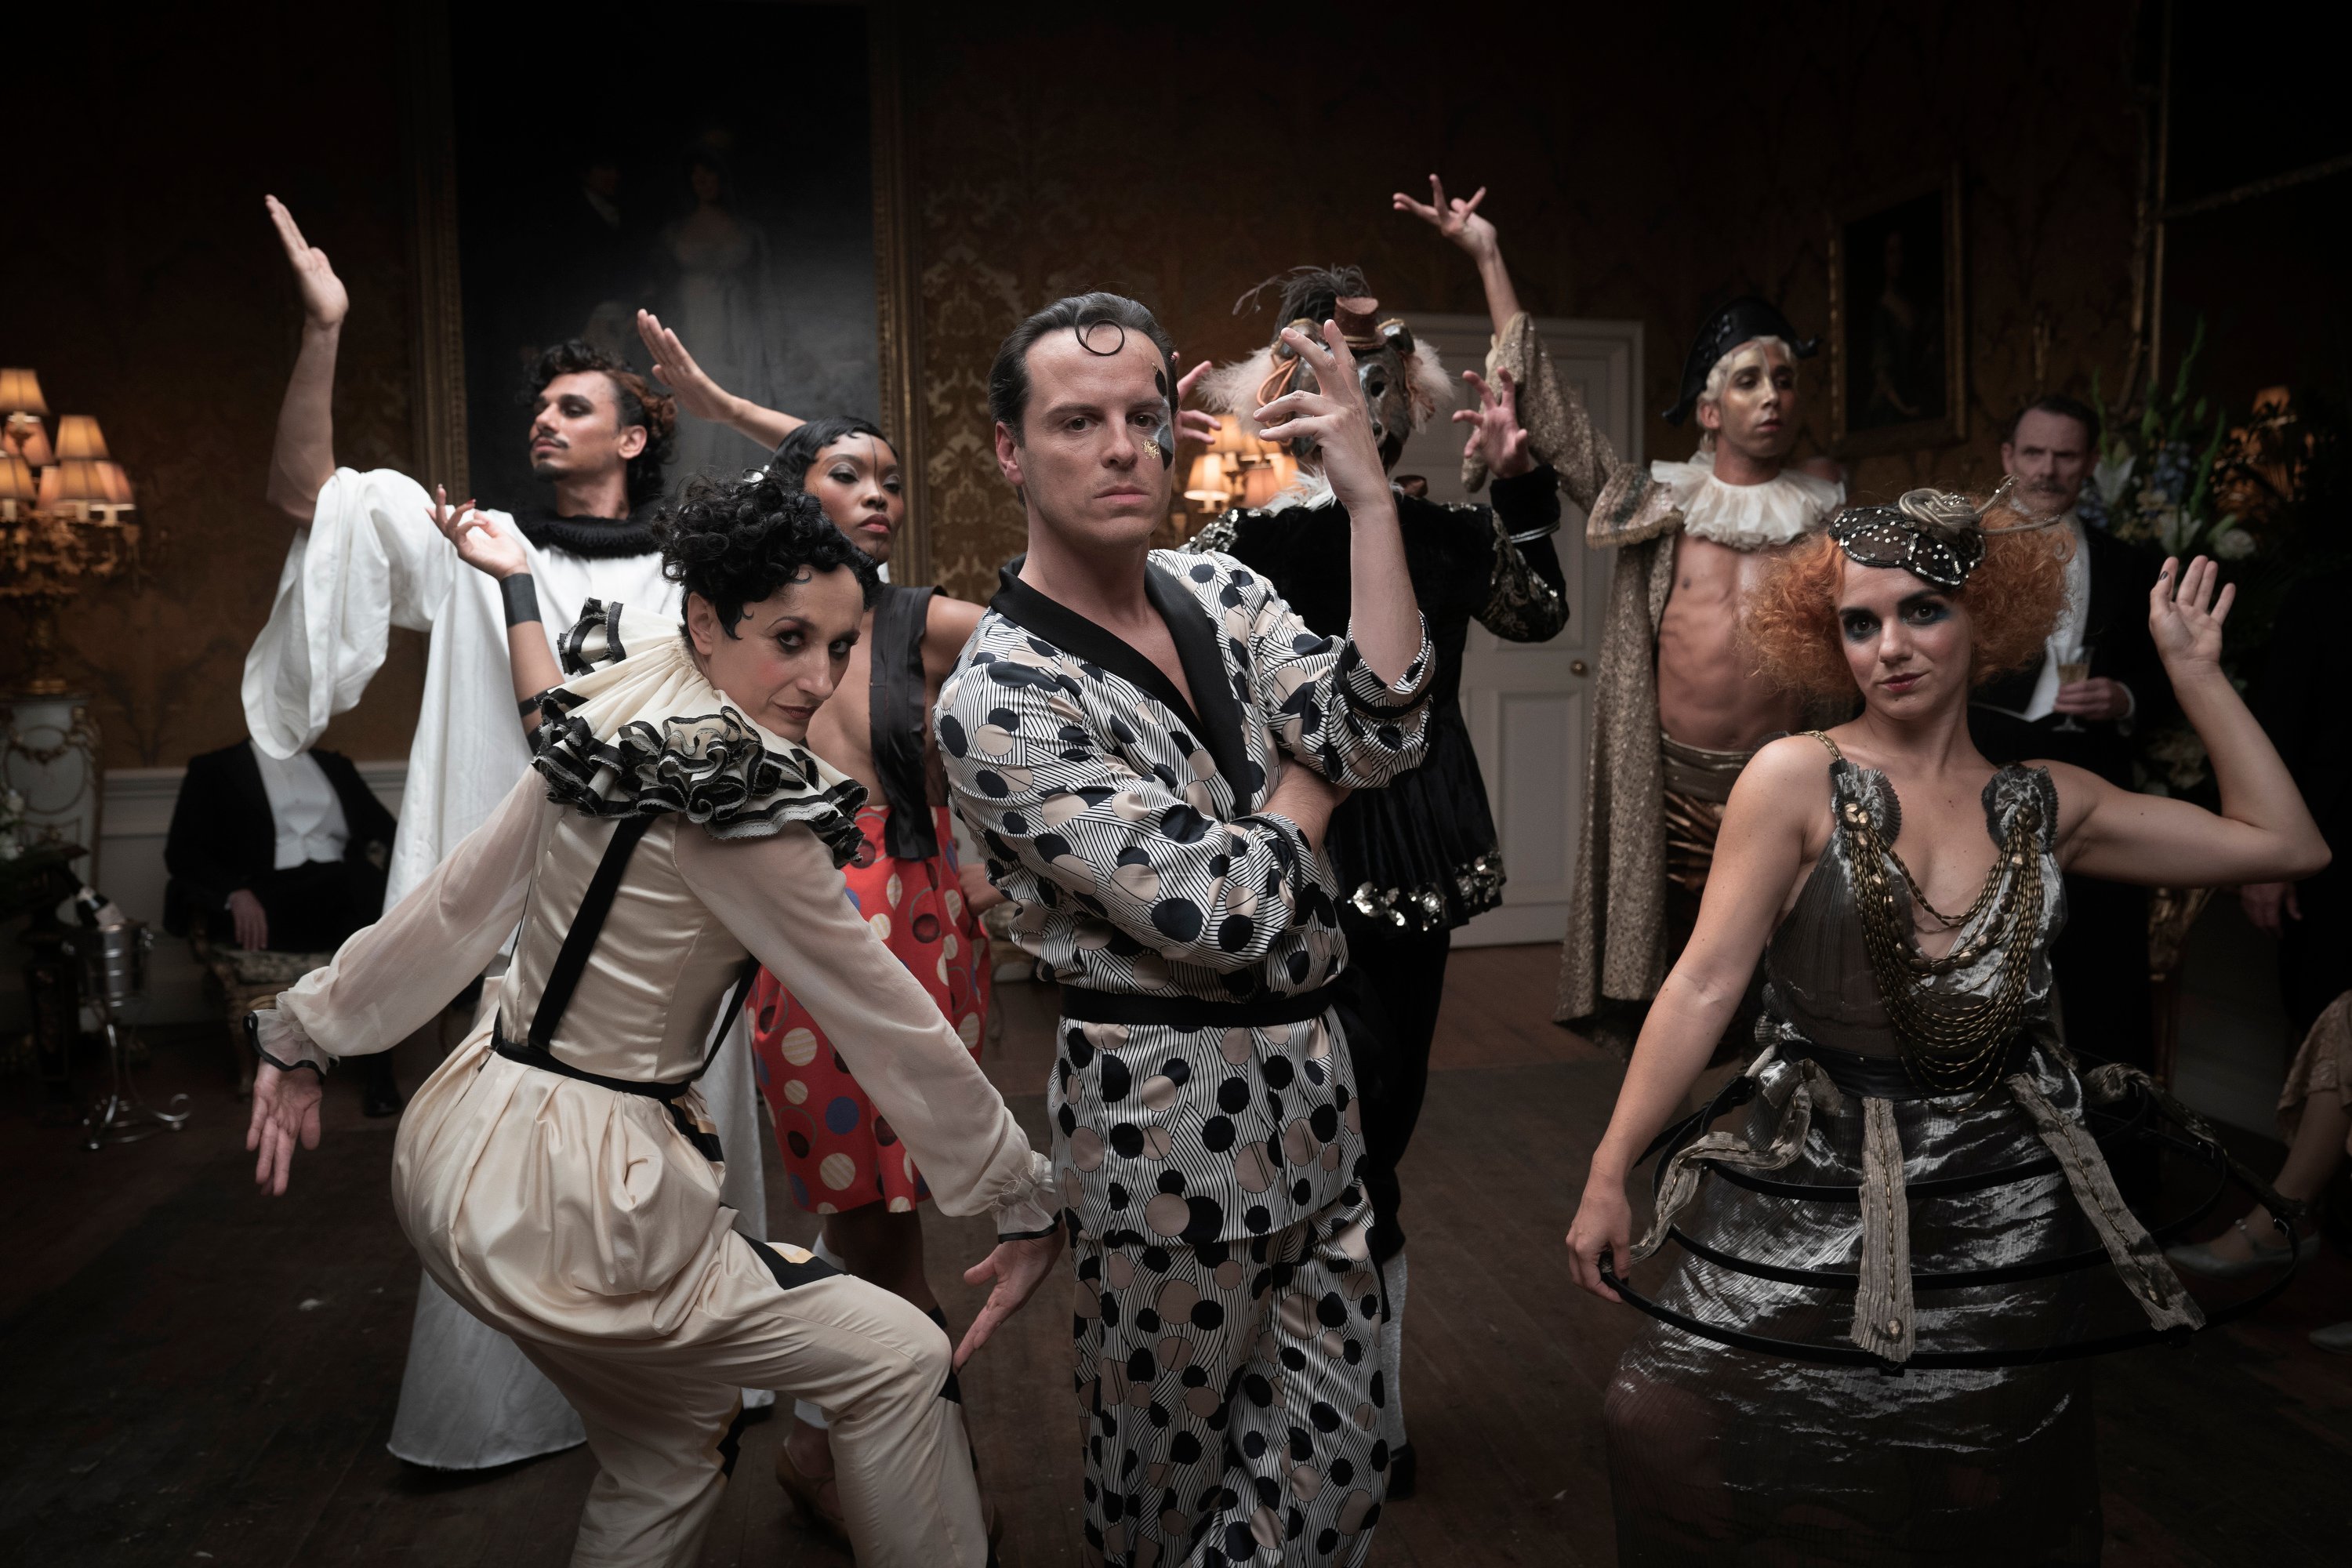 Andrew Scott as Lord Merlin, dancing and surrounded by people in costume in 'The Pursuit of Love'